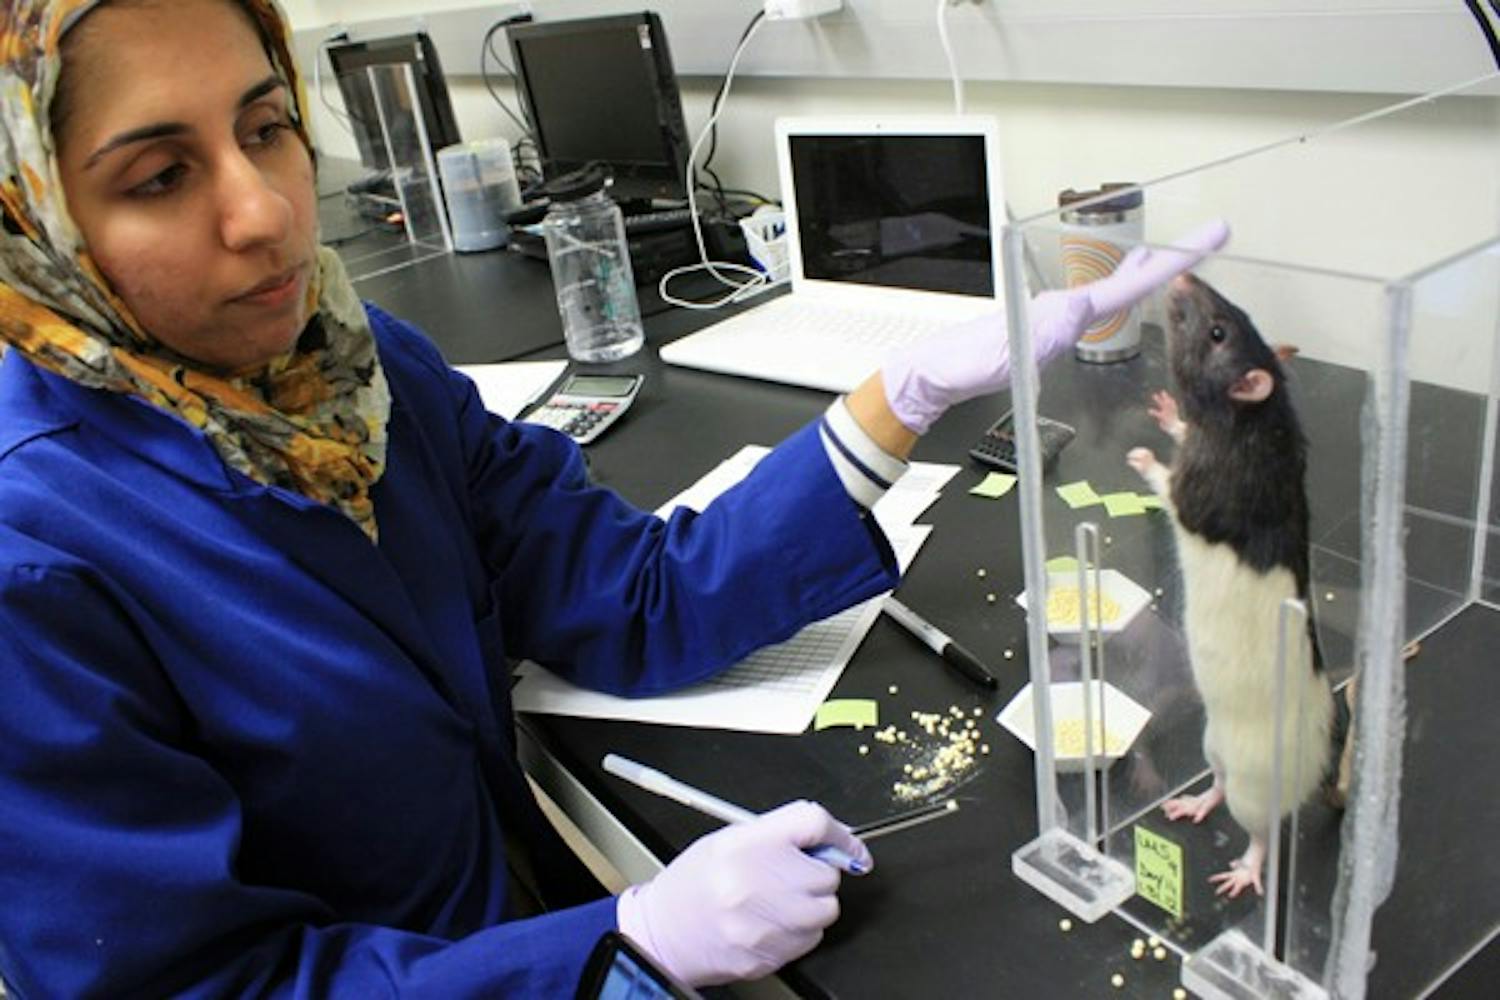 Second-year graduate student Zuha Warraich trains rats as part of an ASU research study about Parkinson's disease. (Photo by Jessie Wardarski)